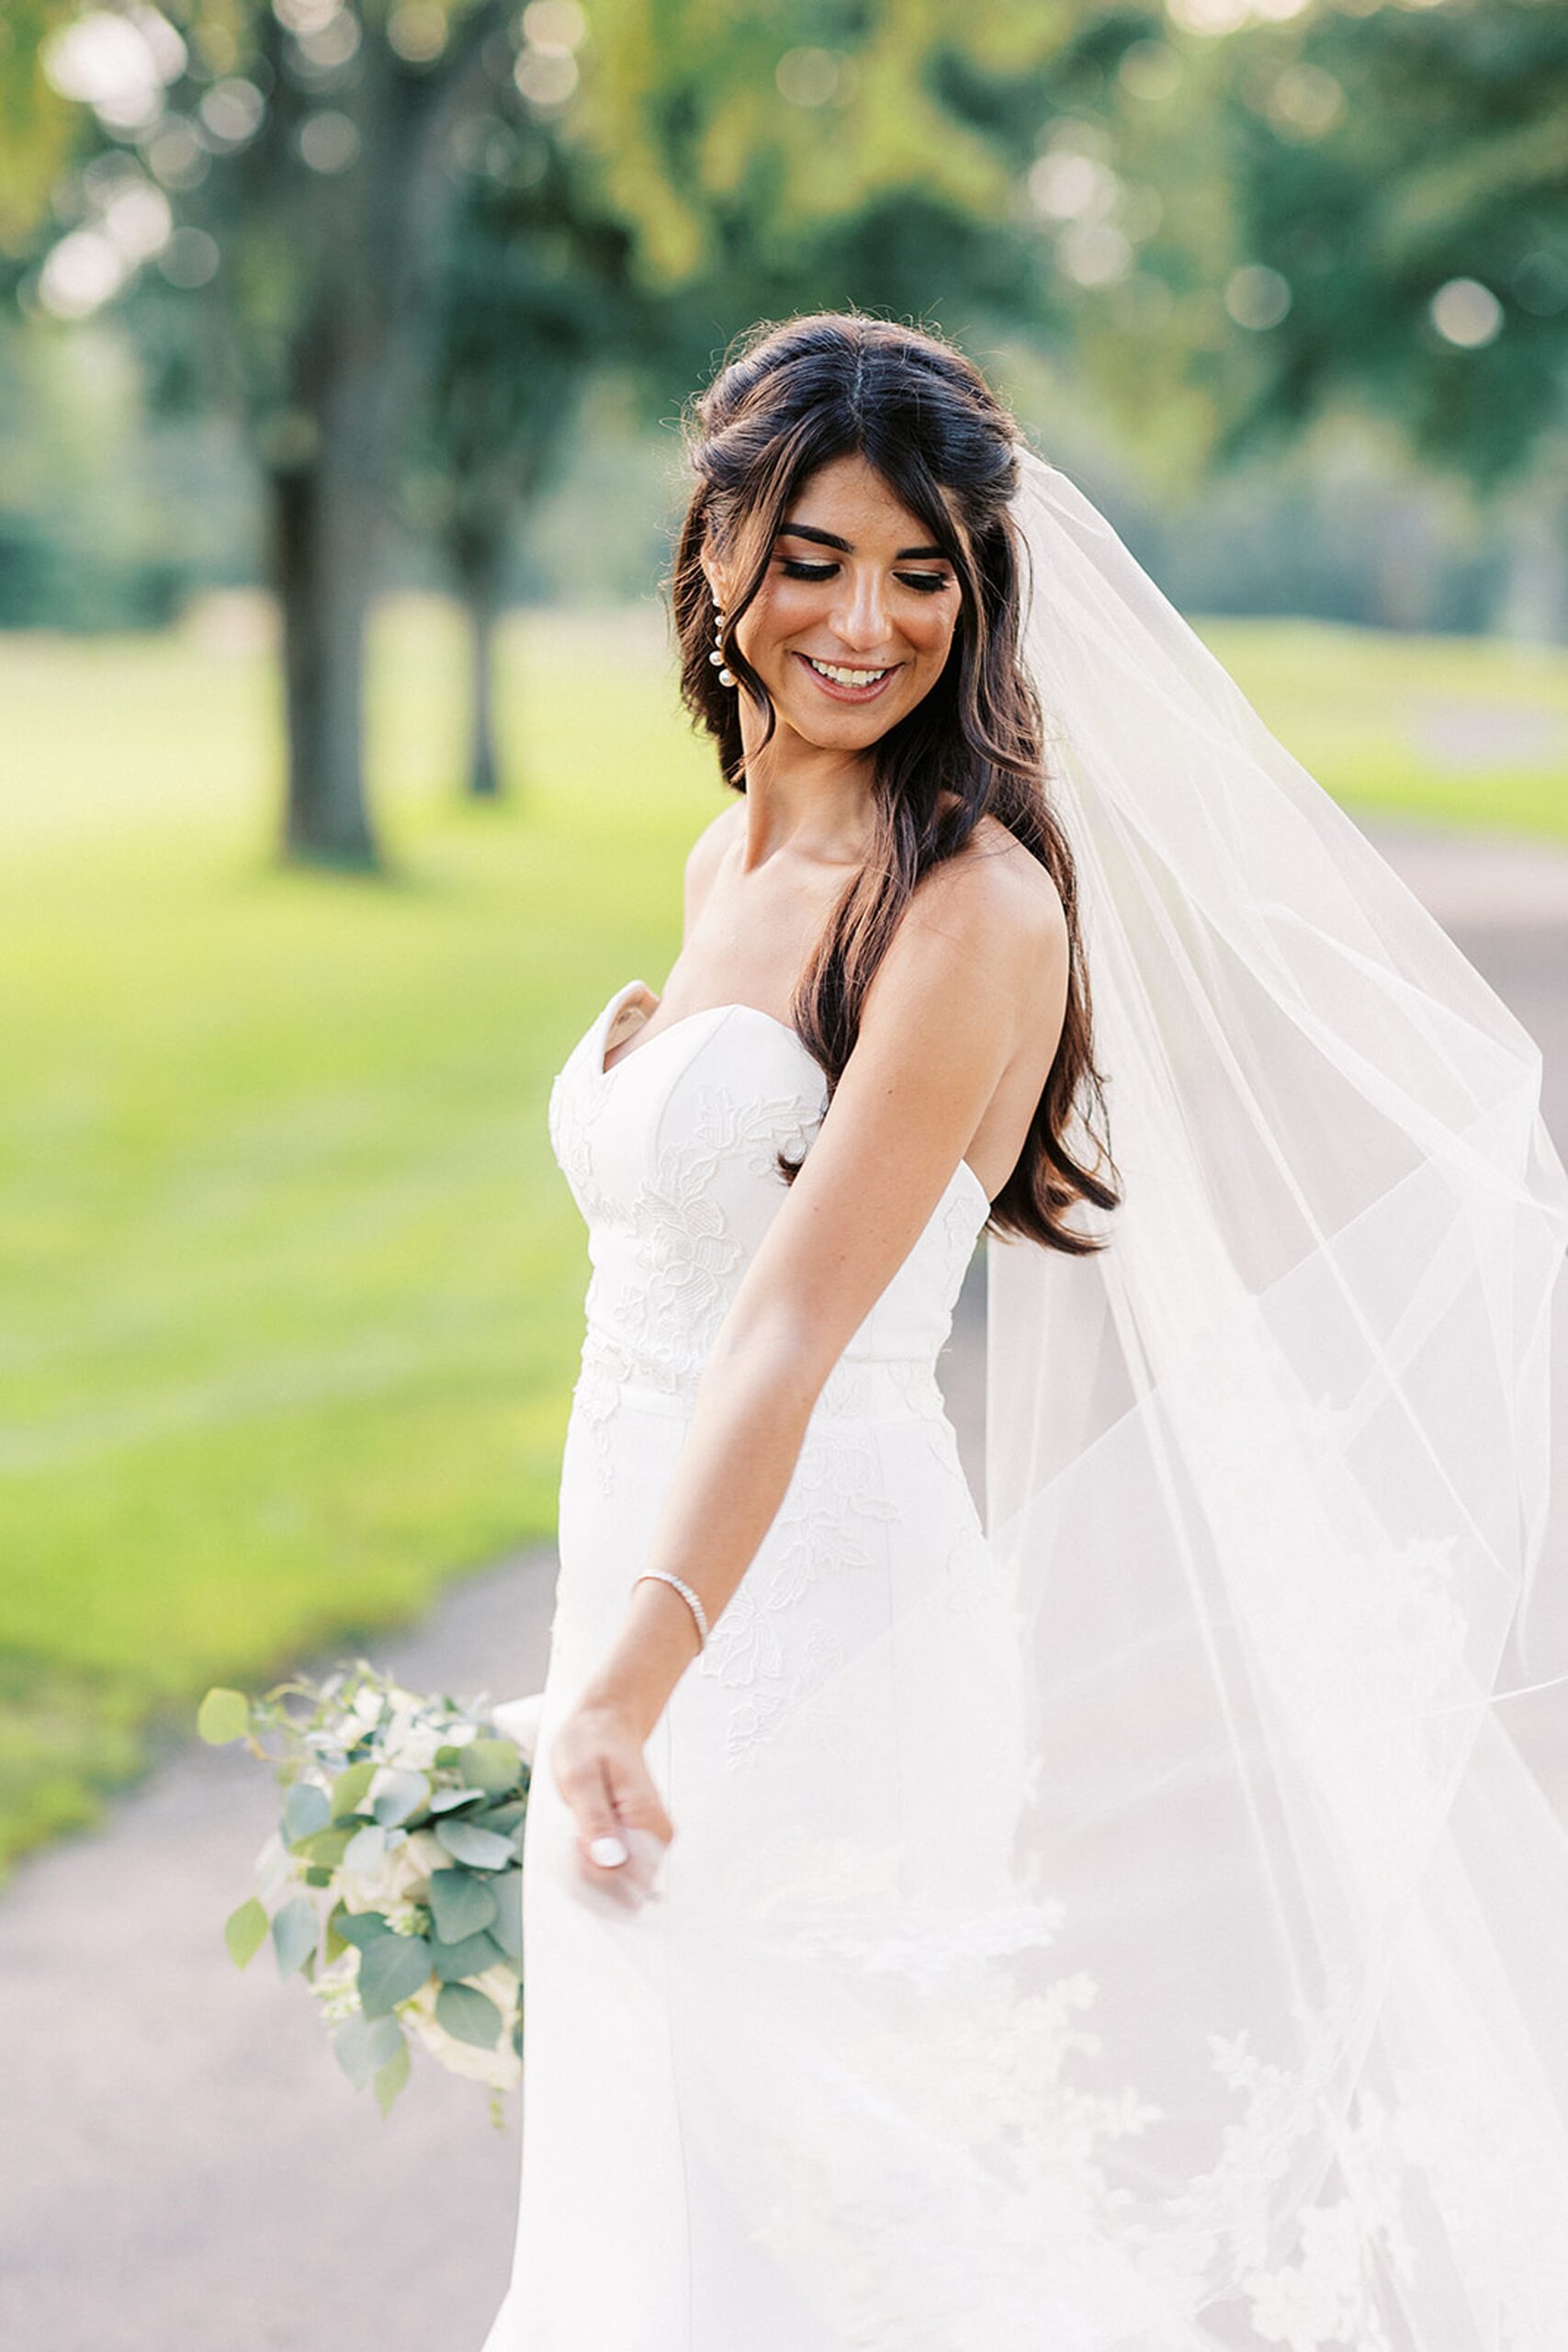 A bride twirls and dances in a paved golf cart path on a golf course